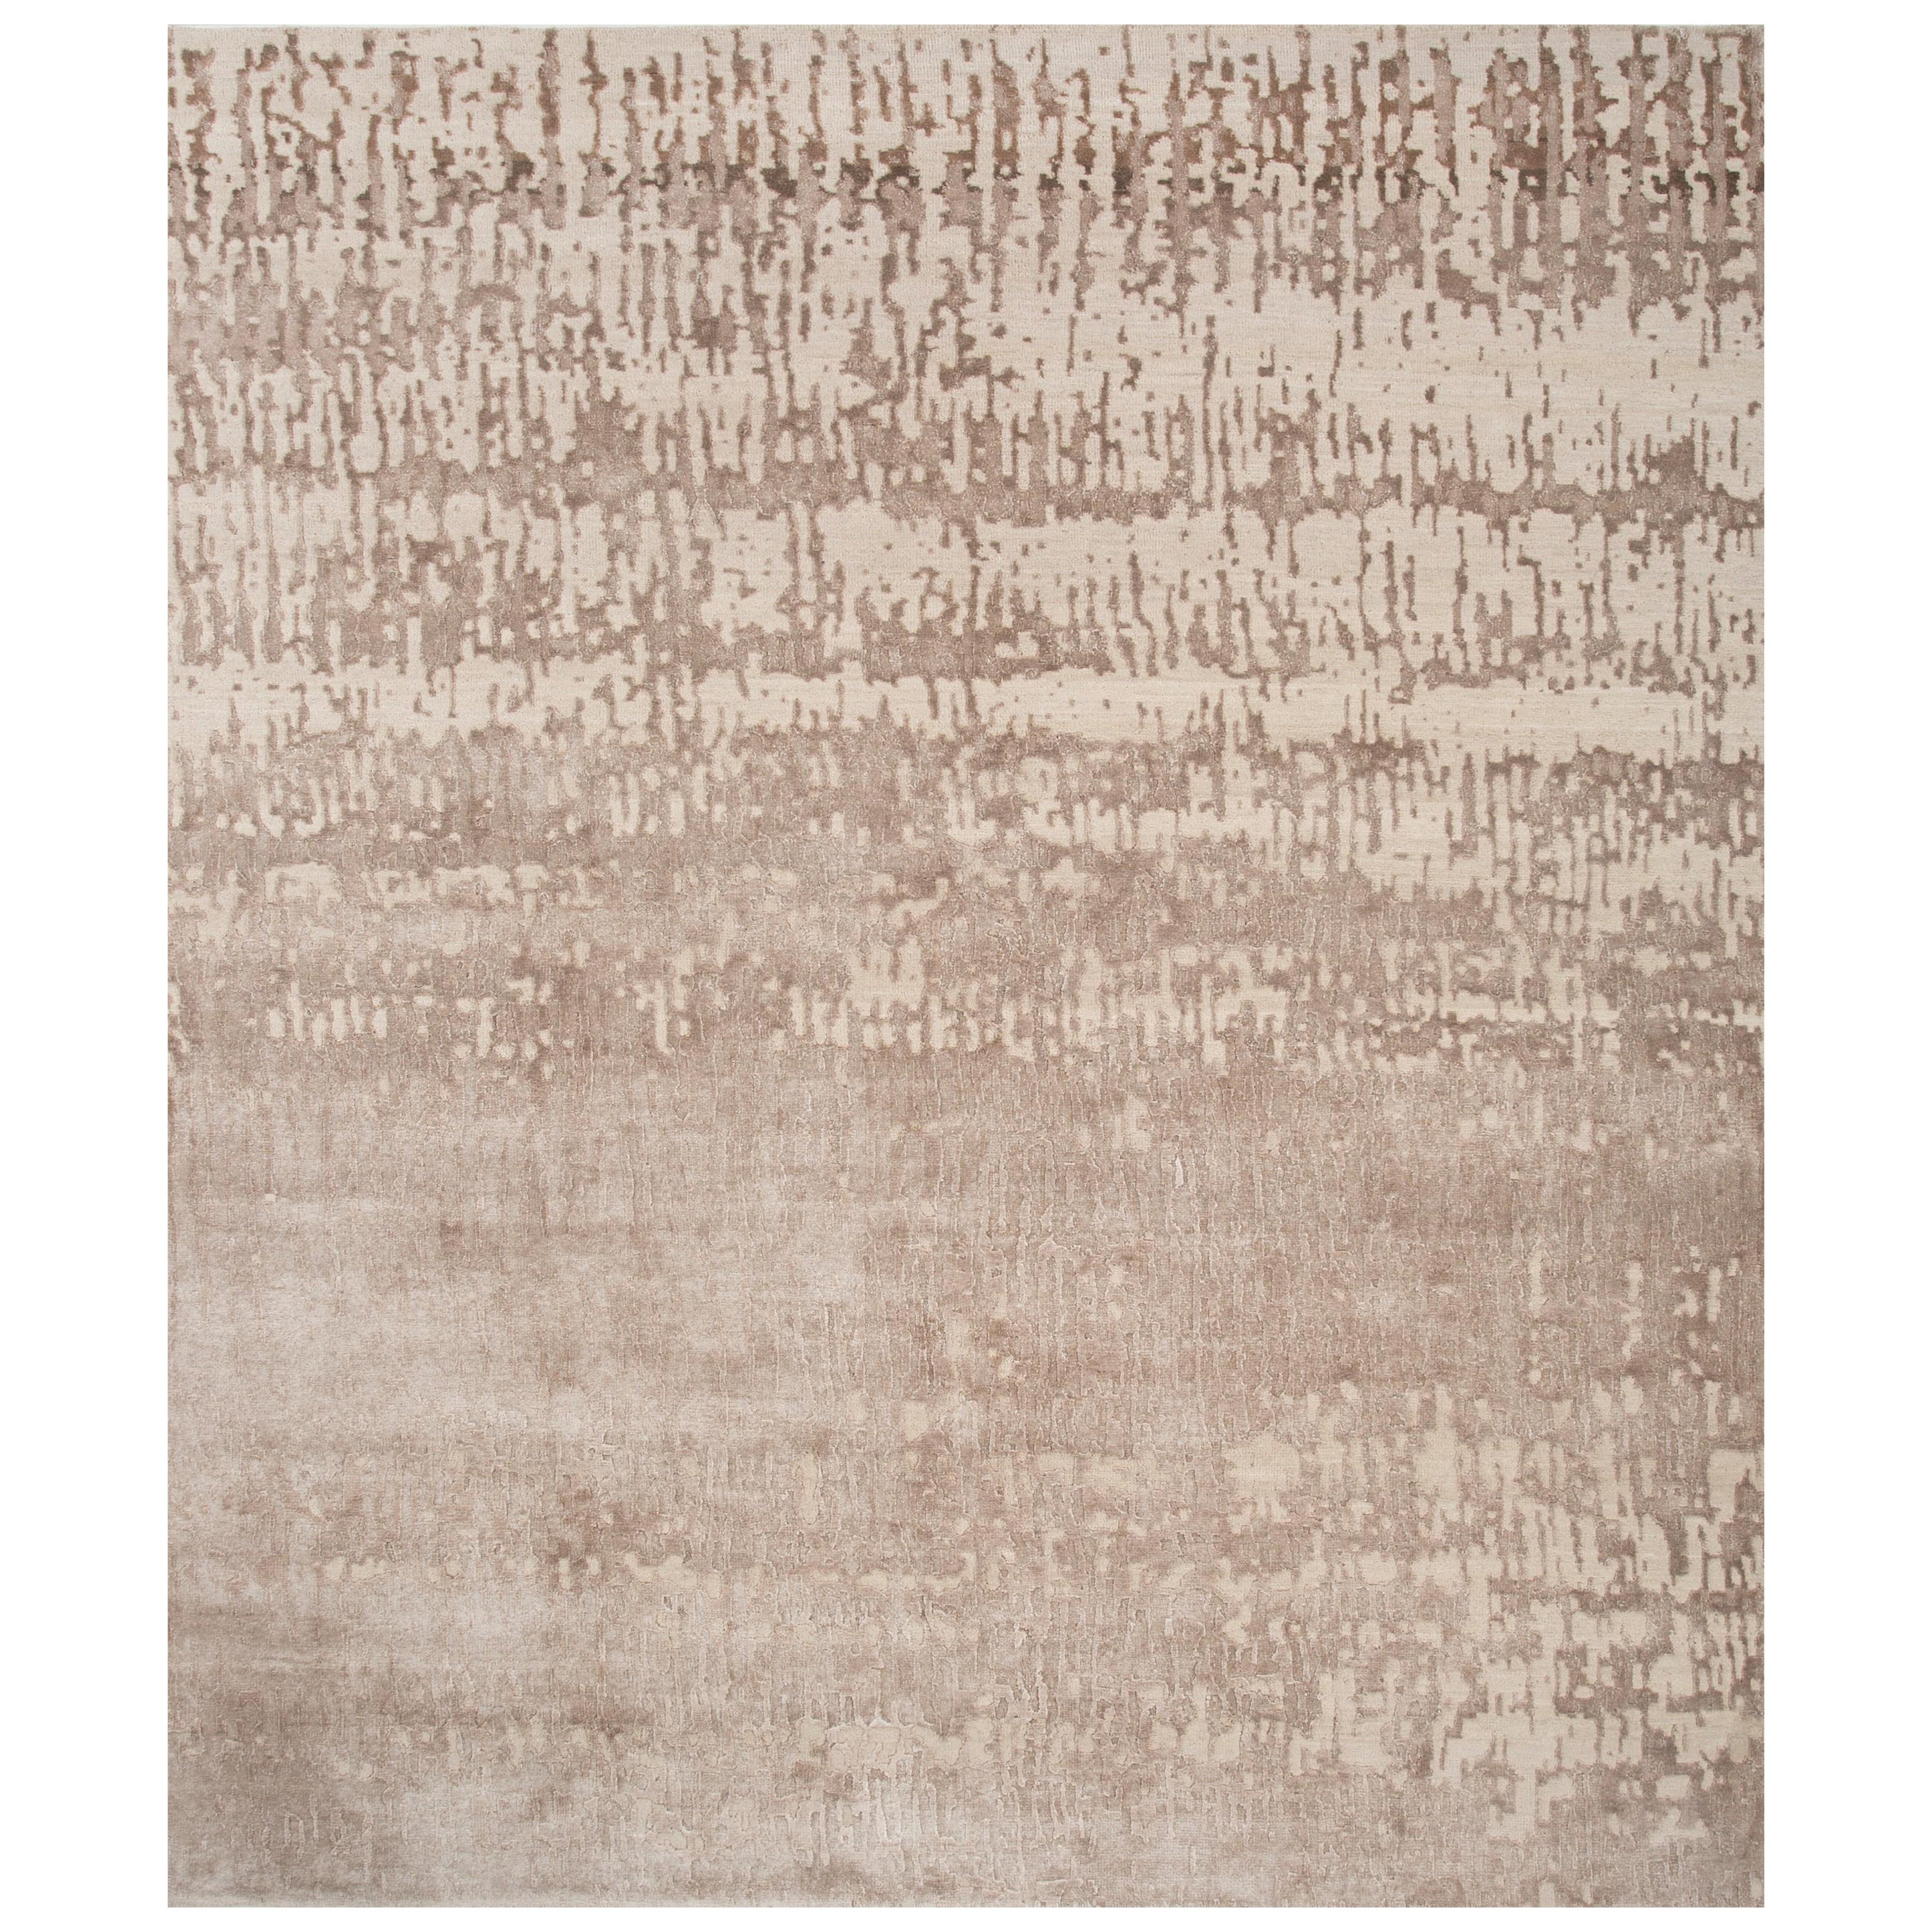 Eternal Sandstone Antique White & White Sand 240X300 cm Handknotted Rug For Sale